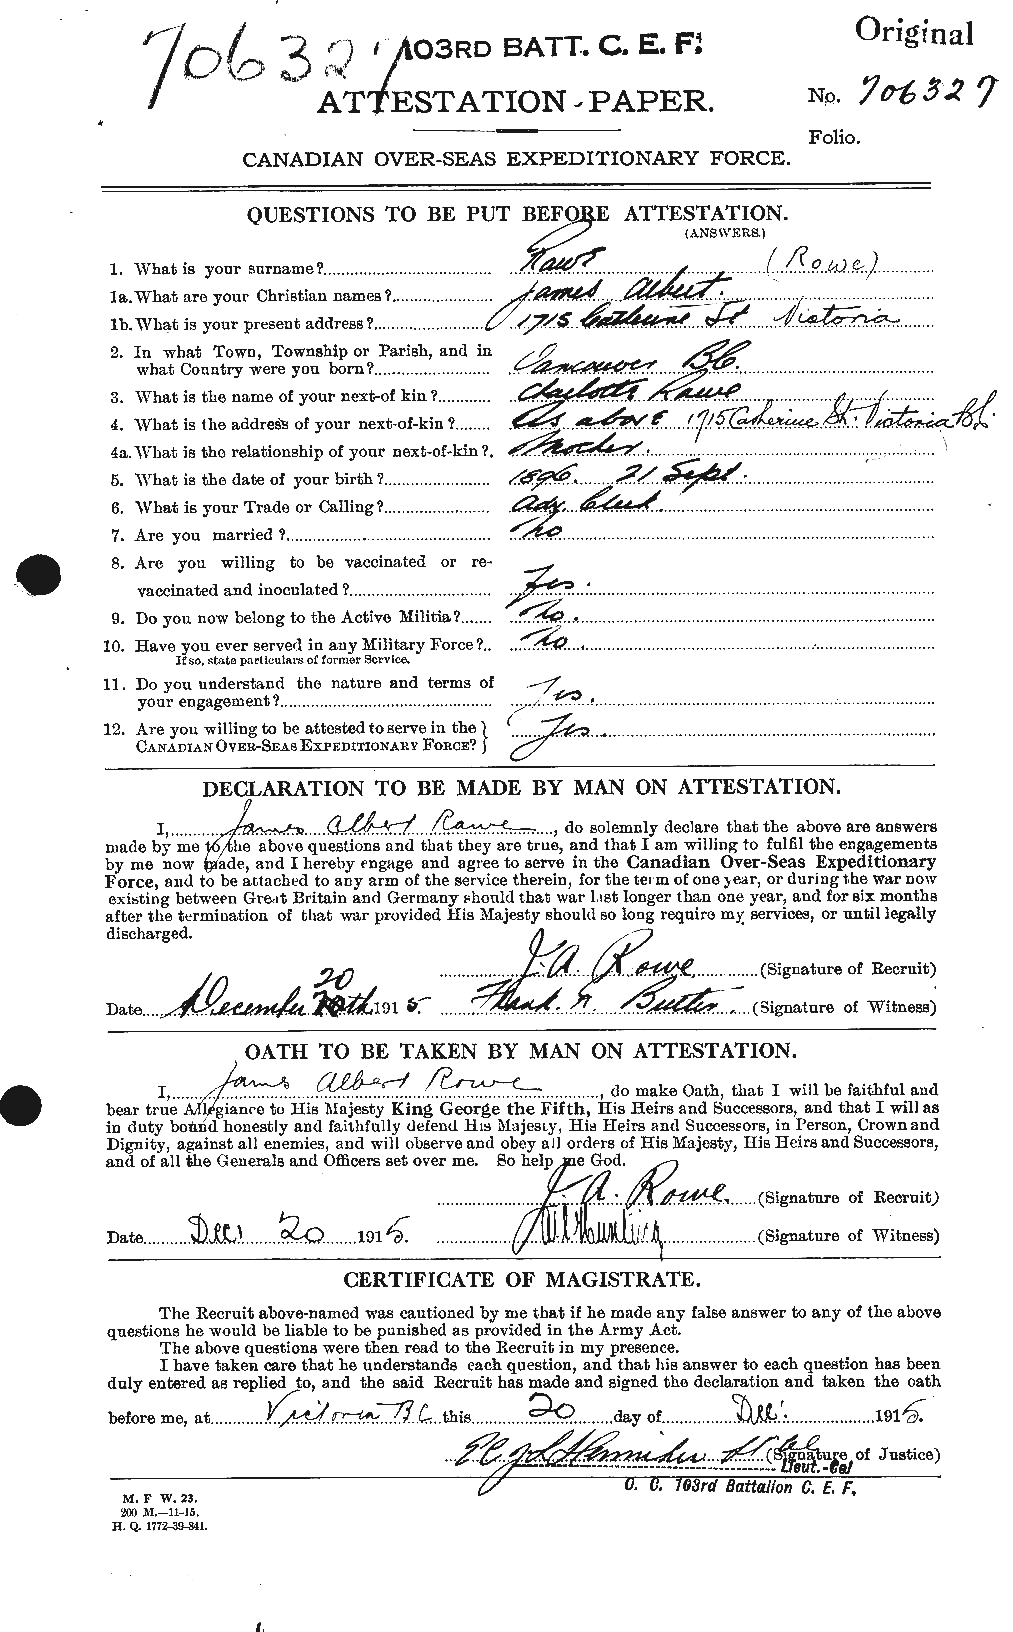 Personnel Records of the First World War - CEF 615910a